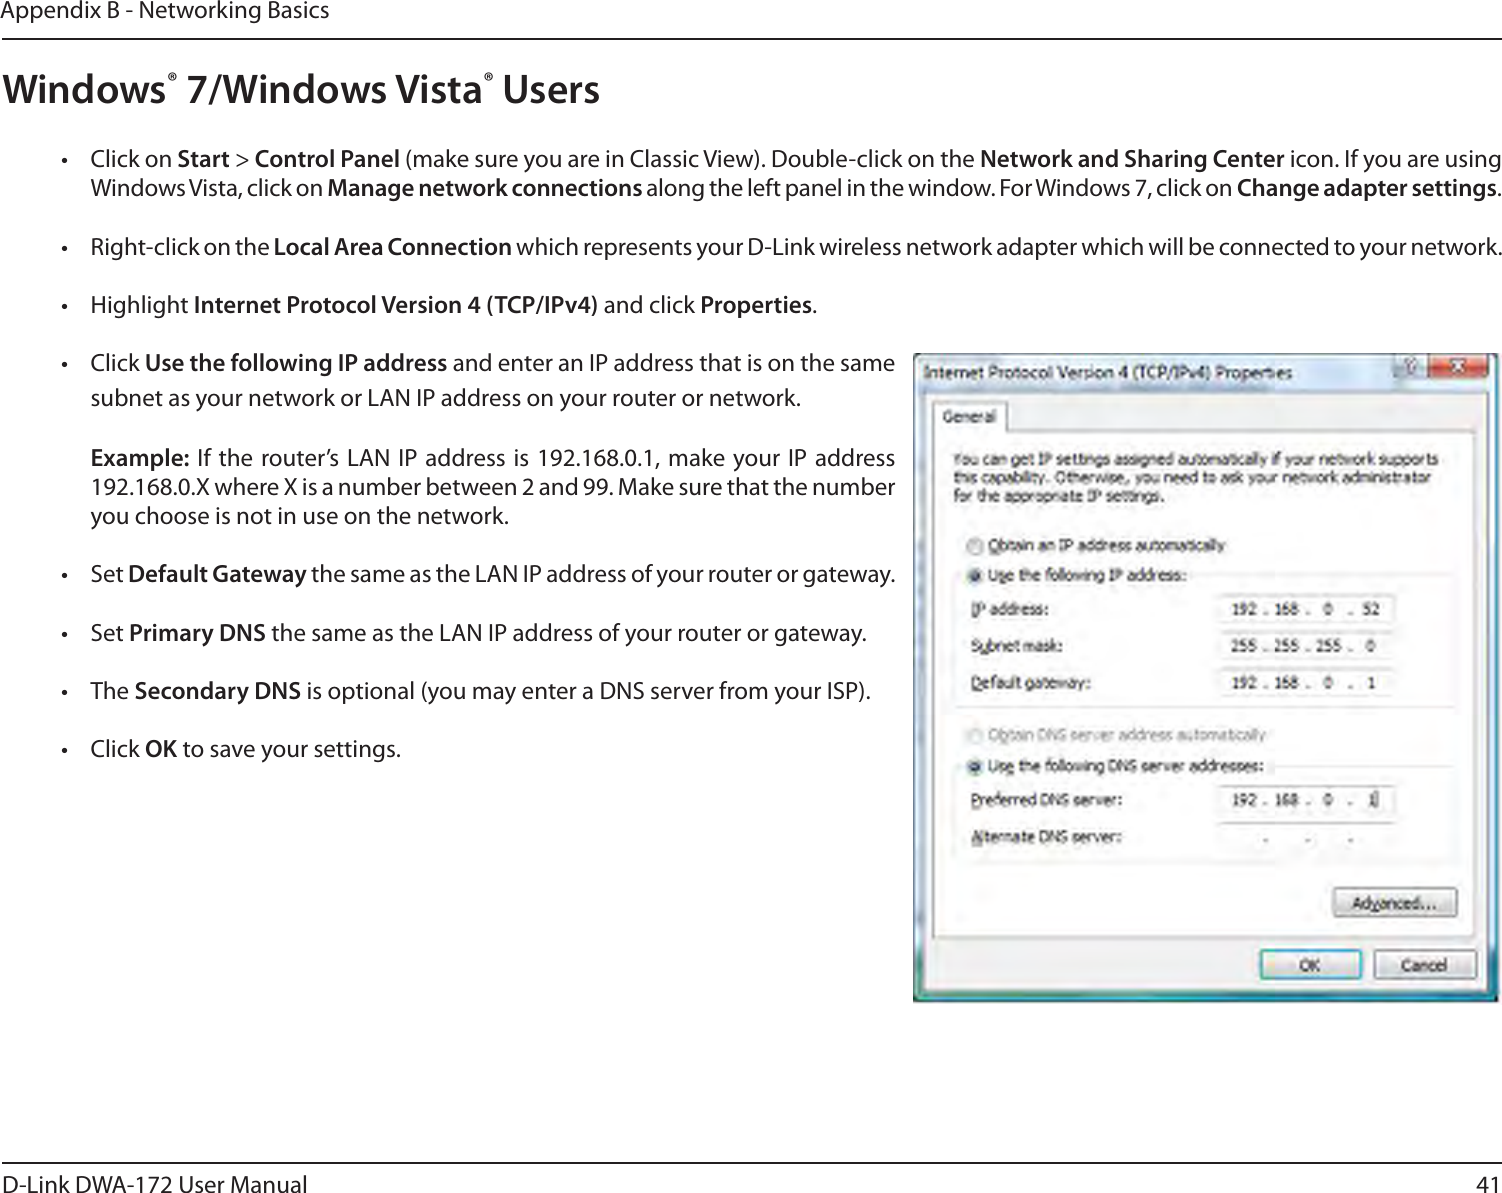 41D-Link DWA-172 User ManualAppendix B - Networking BasicsWindows® 7/Windows Vista® Users•  Click on Start &gt; Control Panel (make sure you are in Classic View). Double-click on the Network and Sharing Center icon. If you are using Windows Vista, click on Manage network connections along the left panel in the window. For Windows 7, click on Change adapter settings.•  Right-click on the Local Area Connection which represents your D-Link wireless network adapter which will be connected to your network.• Highlight Internet Protocol Version 4 (TCP/IPv4) and click Properties.• Click Use the following IP address and enter an IP address that is on the same subnet as your network or LAN IP address on your router or network. Example: If the router’s LAN IP address is 192.168.0.1, make your IP address 192.168.0.X where X is a number between 2 and 99. Make sure that the number you choose is not in use on the network. • Set Default Gateway the same as the LAN IP address of your router or gateway.• Set Primary DNS the same as the LAN IP address of your router or gateway. • The Secondary DNS is optional (you may enter a DNS server from your ISP).• Click OK to save your settings.